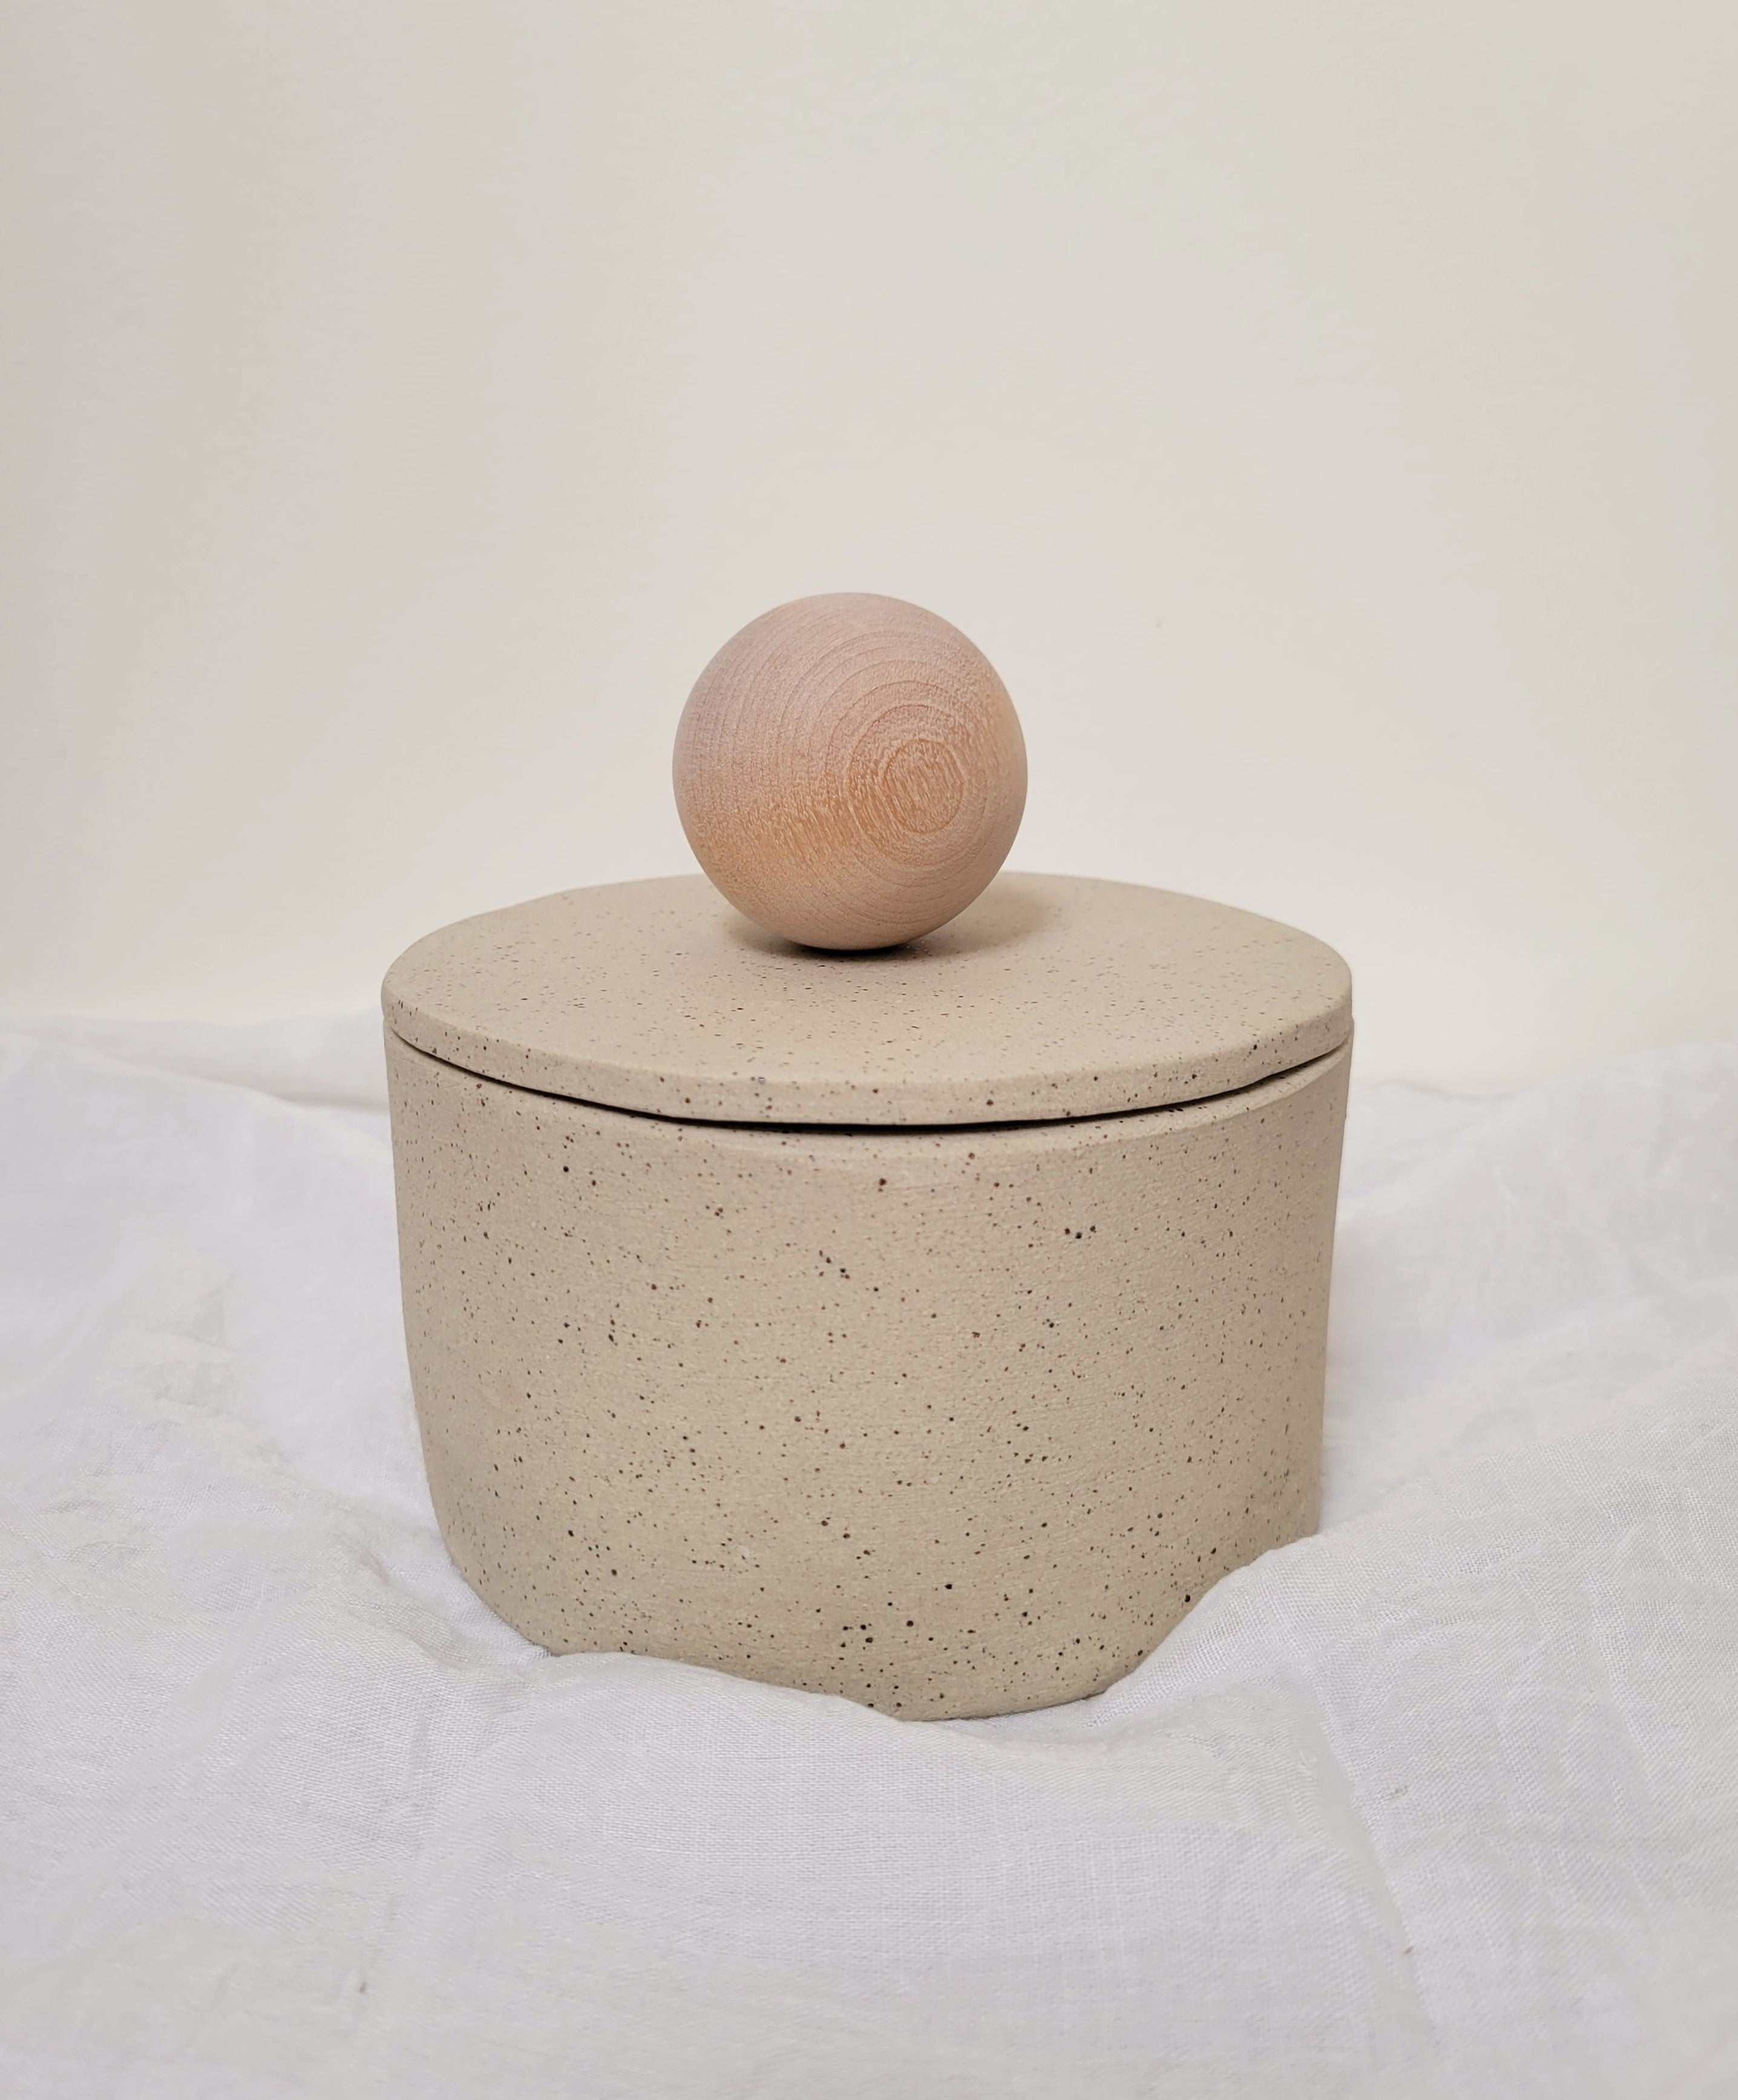 Cream Ceramic Pottery Container With Wood Ball - Made to Order